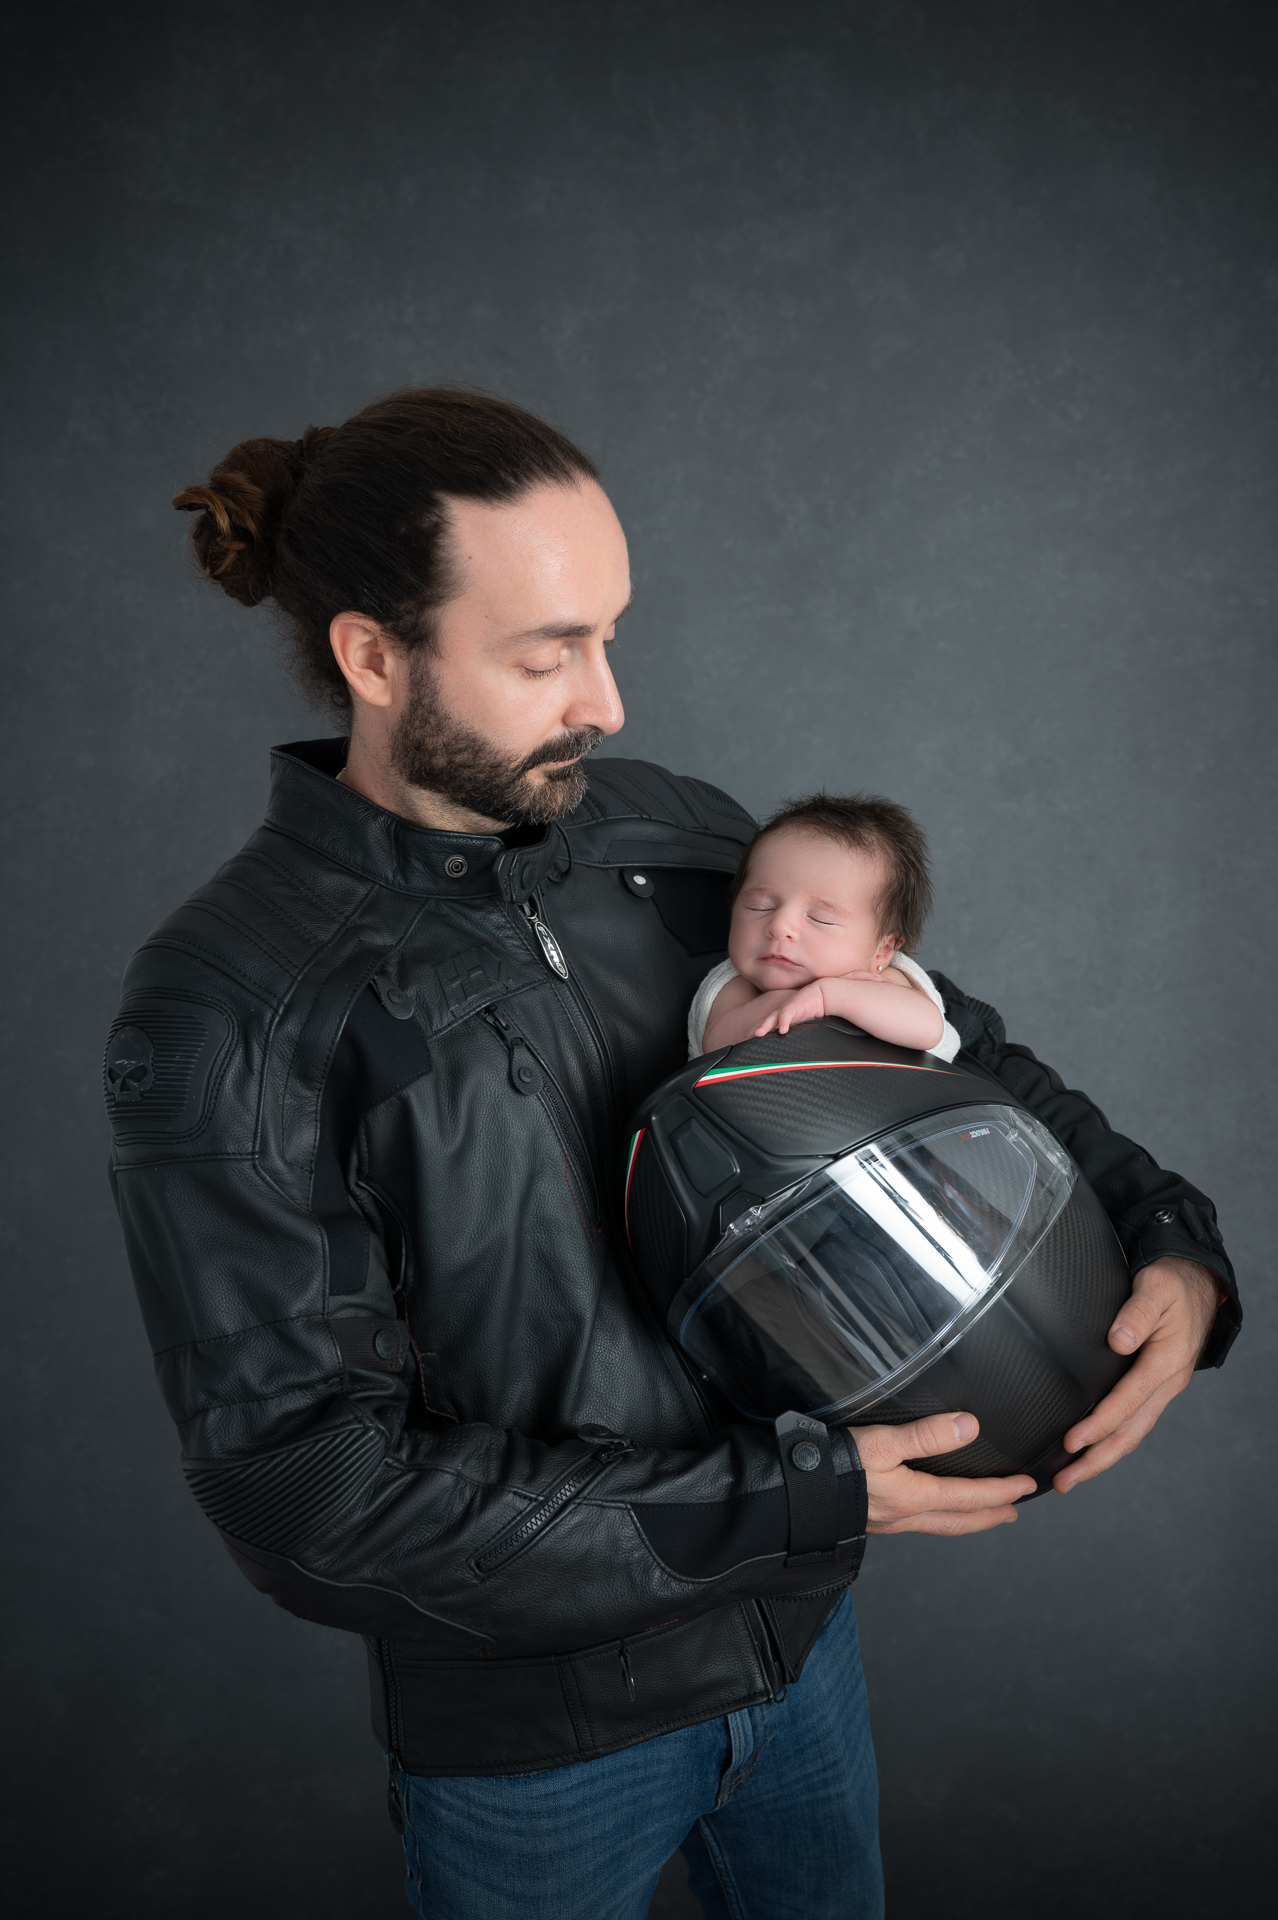 Man holds his newborn daughter which is resting on motorcycle helmet. Wears motorcycle black leather jacket and blue jeans. Dark backdrop.